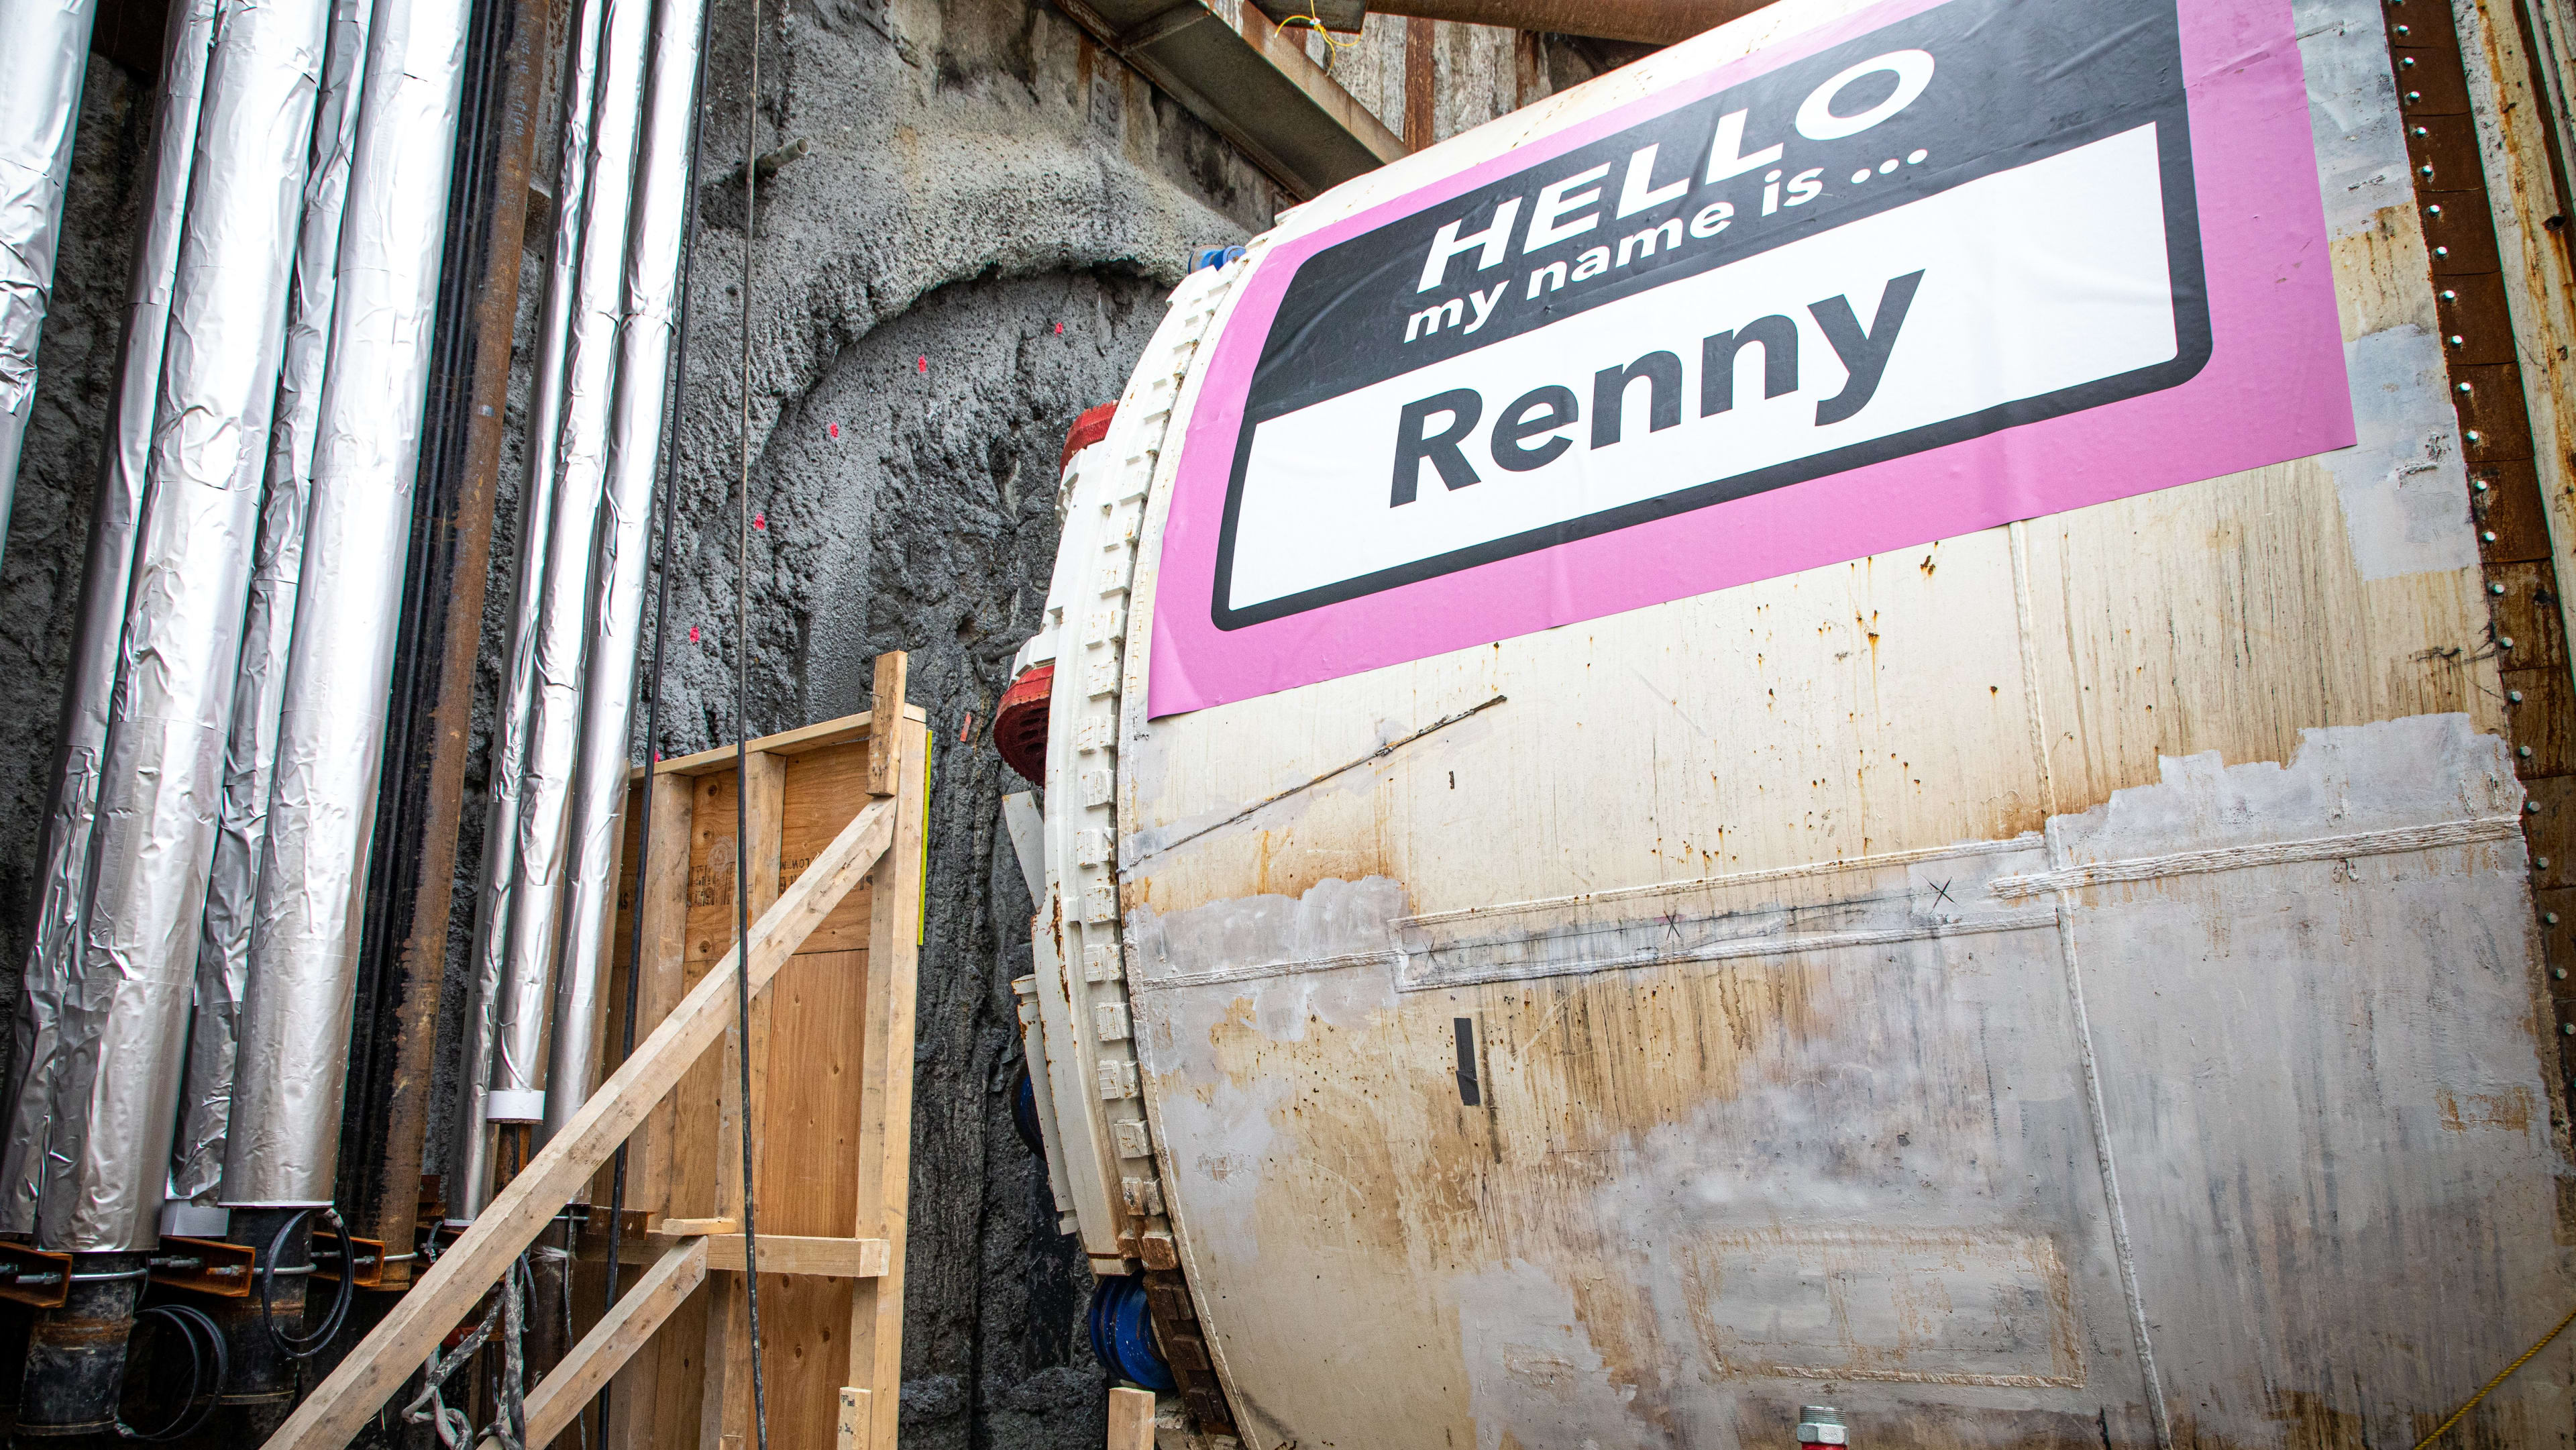 A close-up of Renny, one of the Eglinton Crosstown West Extension TBMs